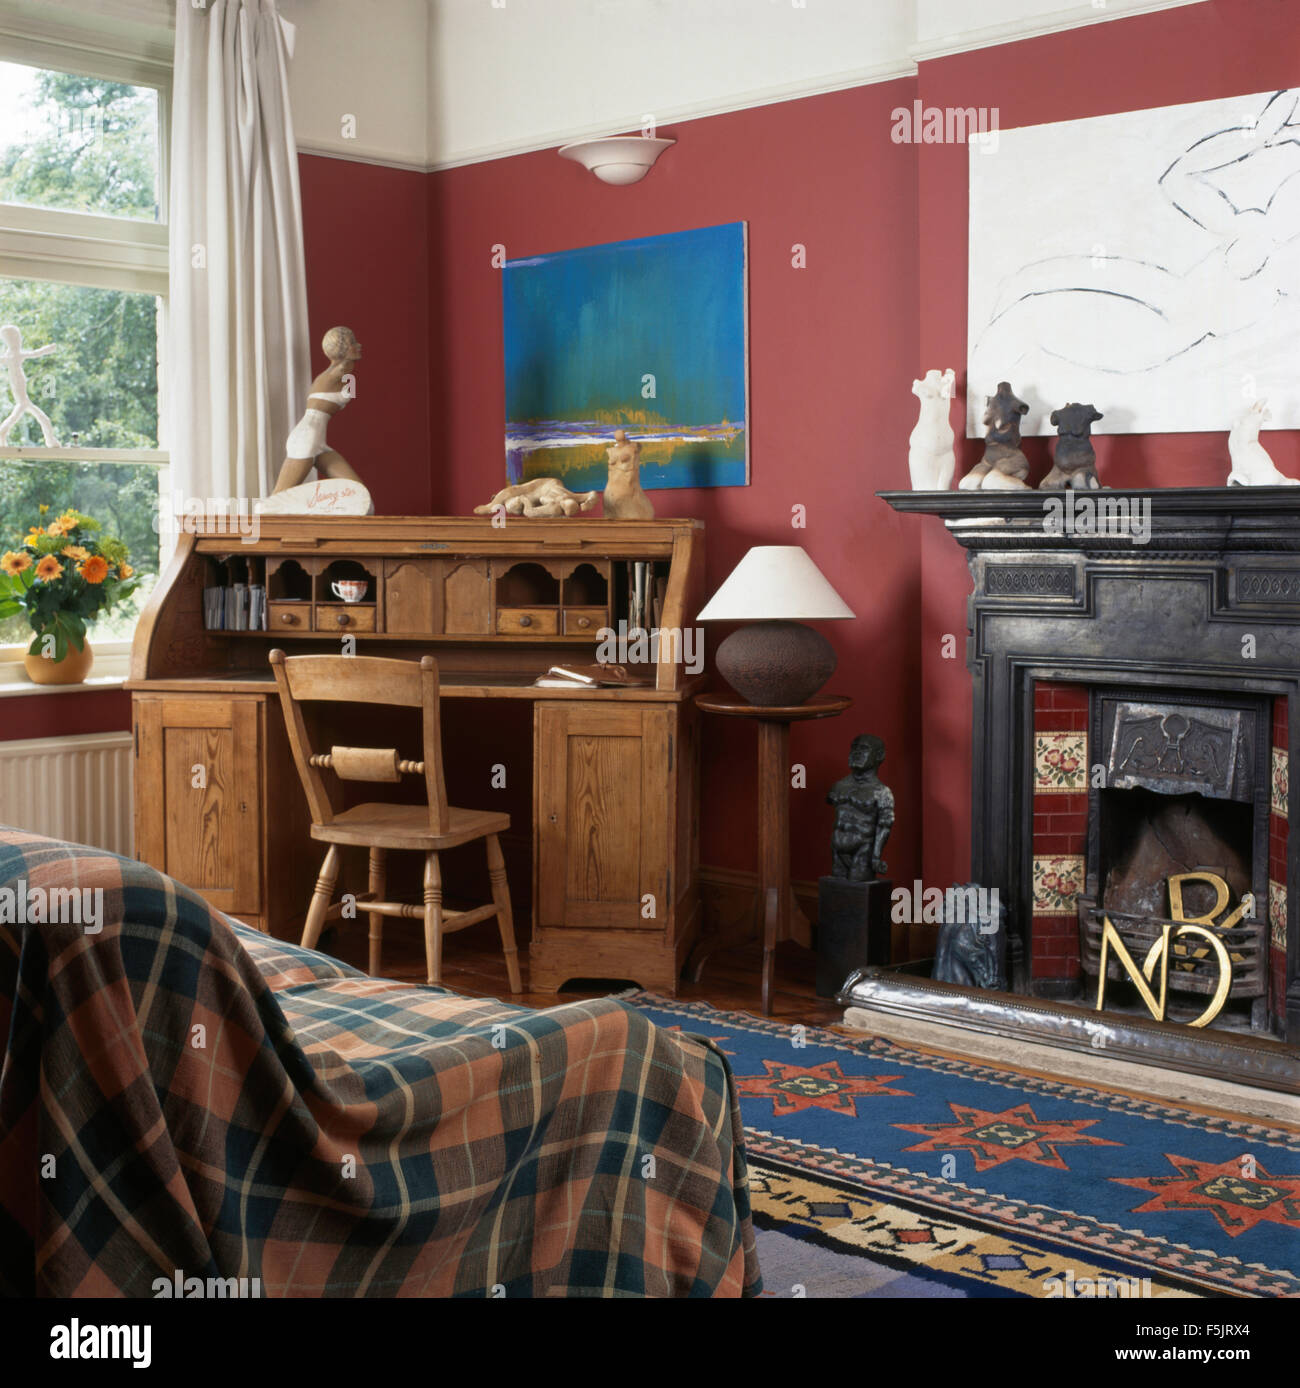 Plaid throw and old pine bureau in a red nineties living room with a black cast iron fireplace Stock Photo